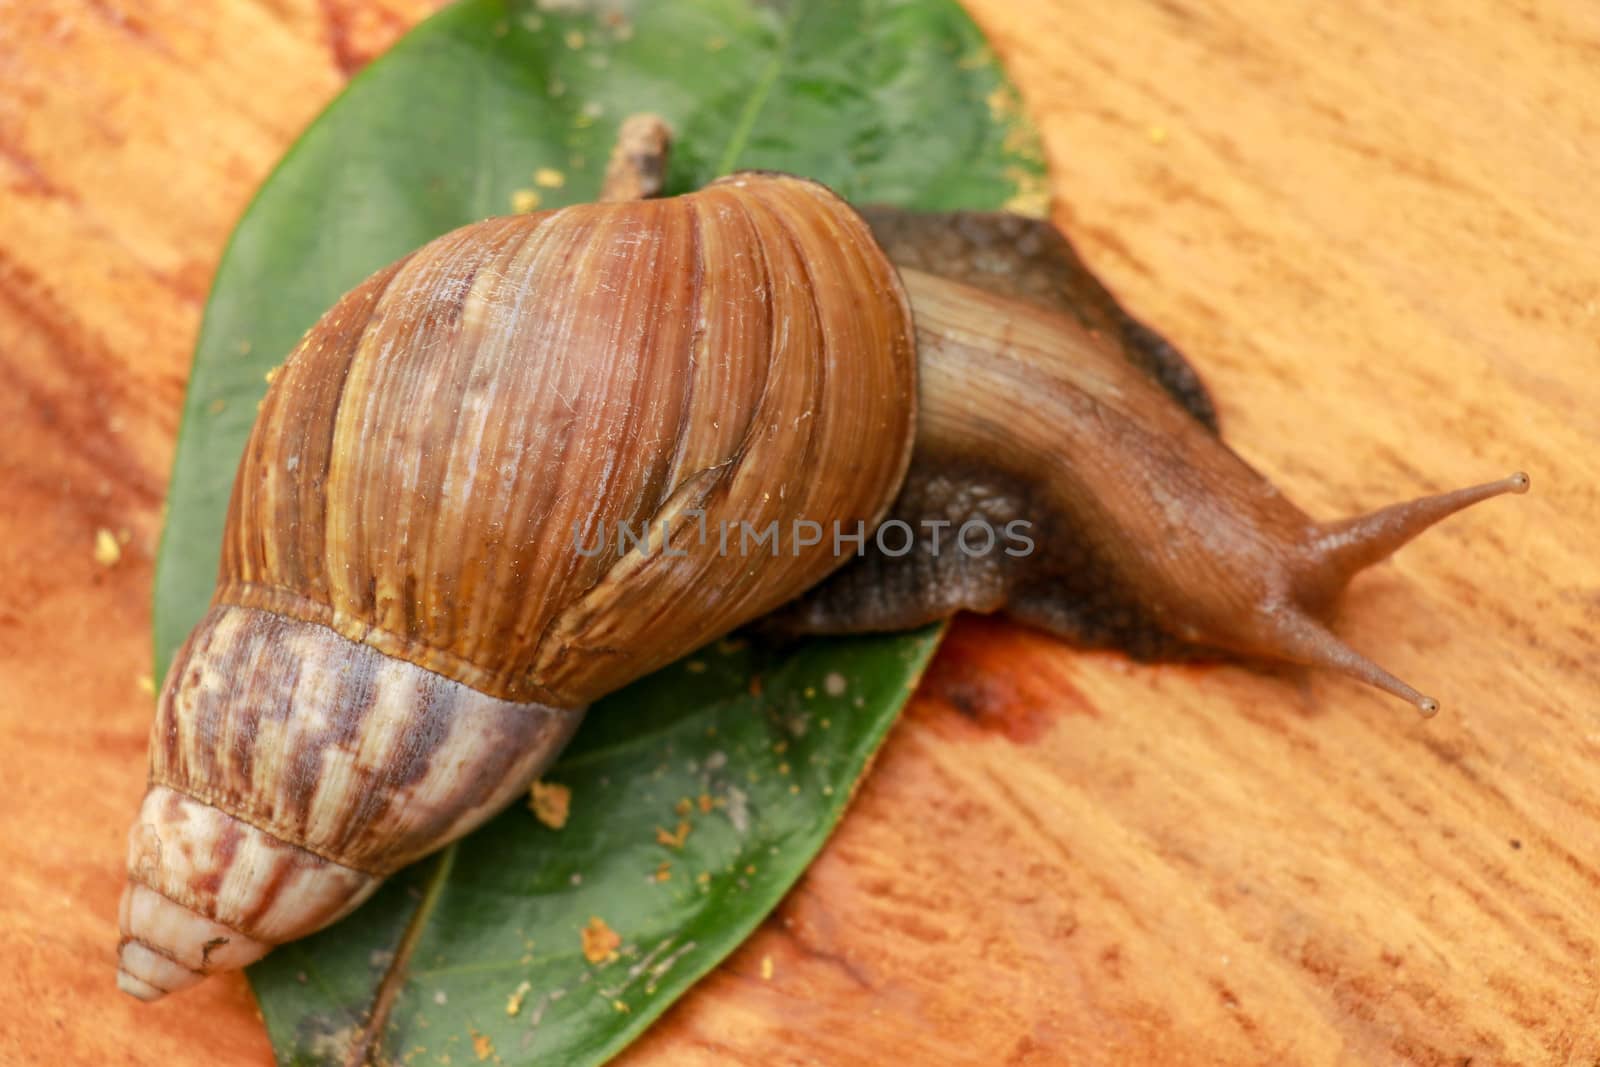 Beautiful patterned brown snail crawls on a wooden surface. Giant african snail by Sanatana2008